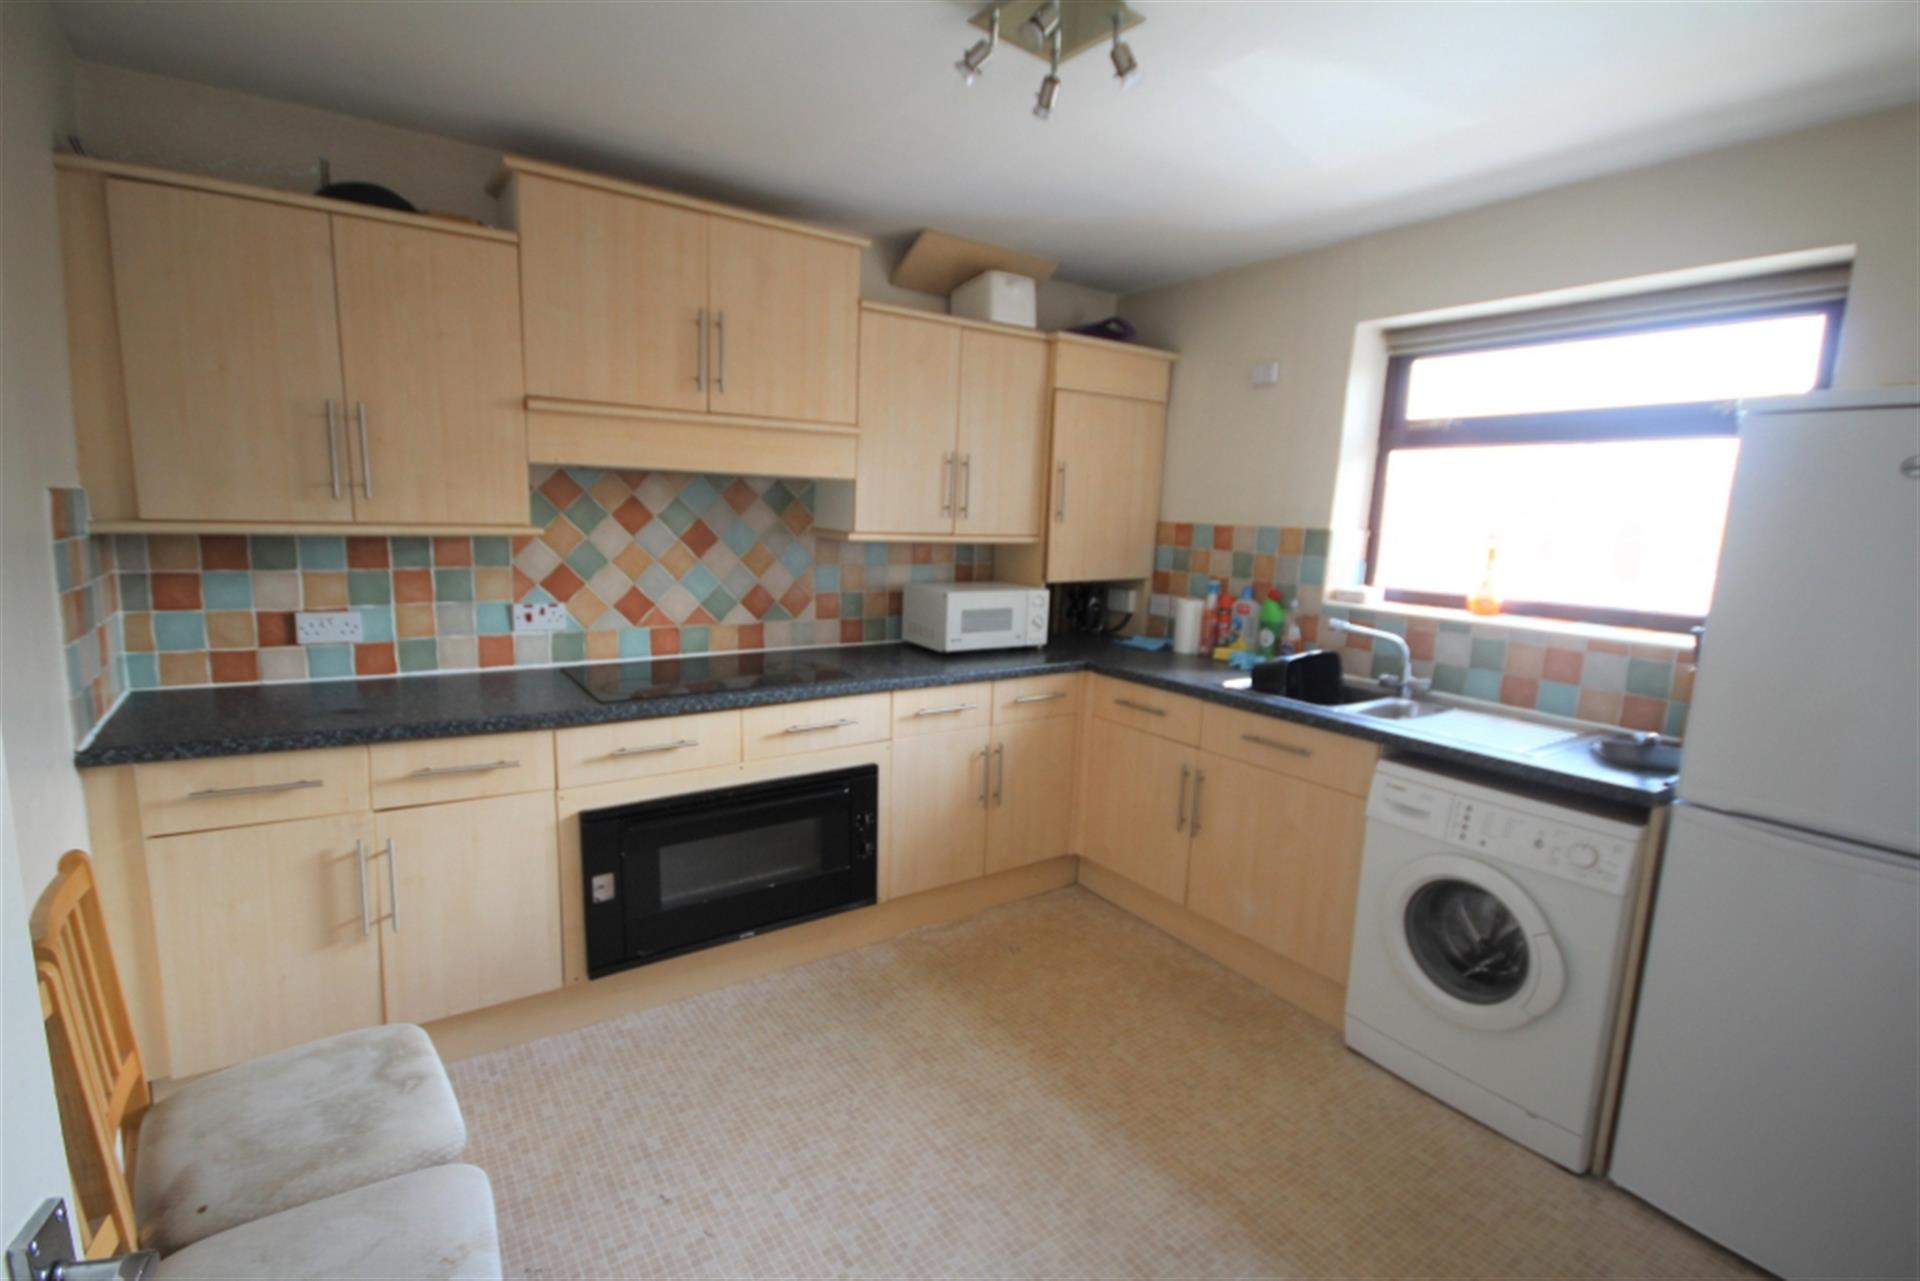 1 bedroom house share house / flat share To Let in Smithills, Bolton, Lancs - Communal Kitchen